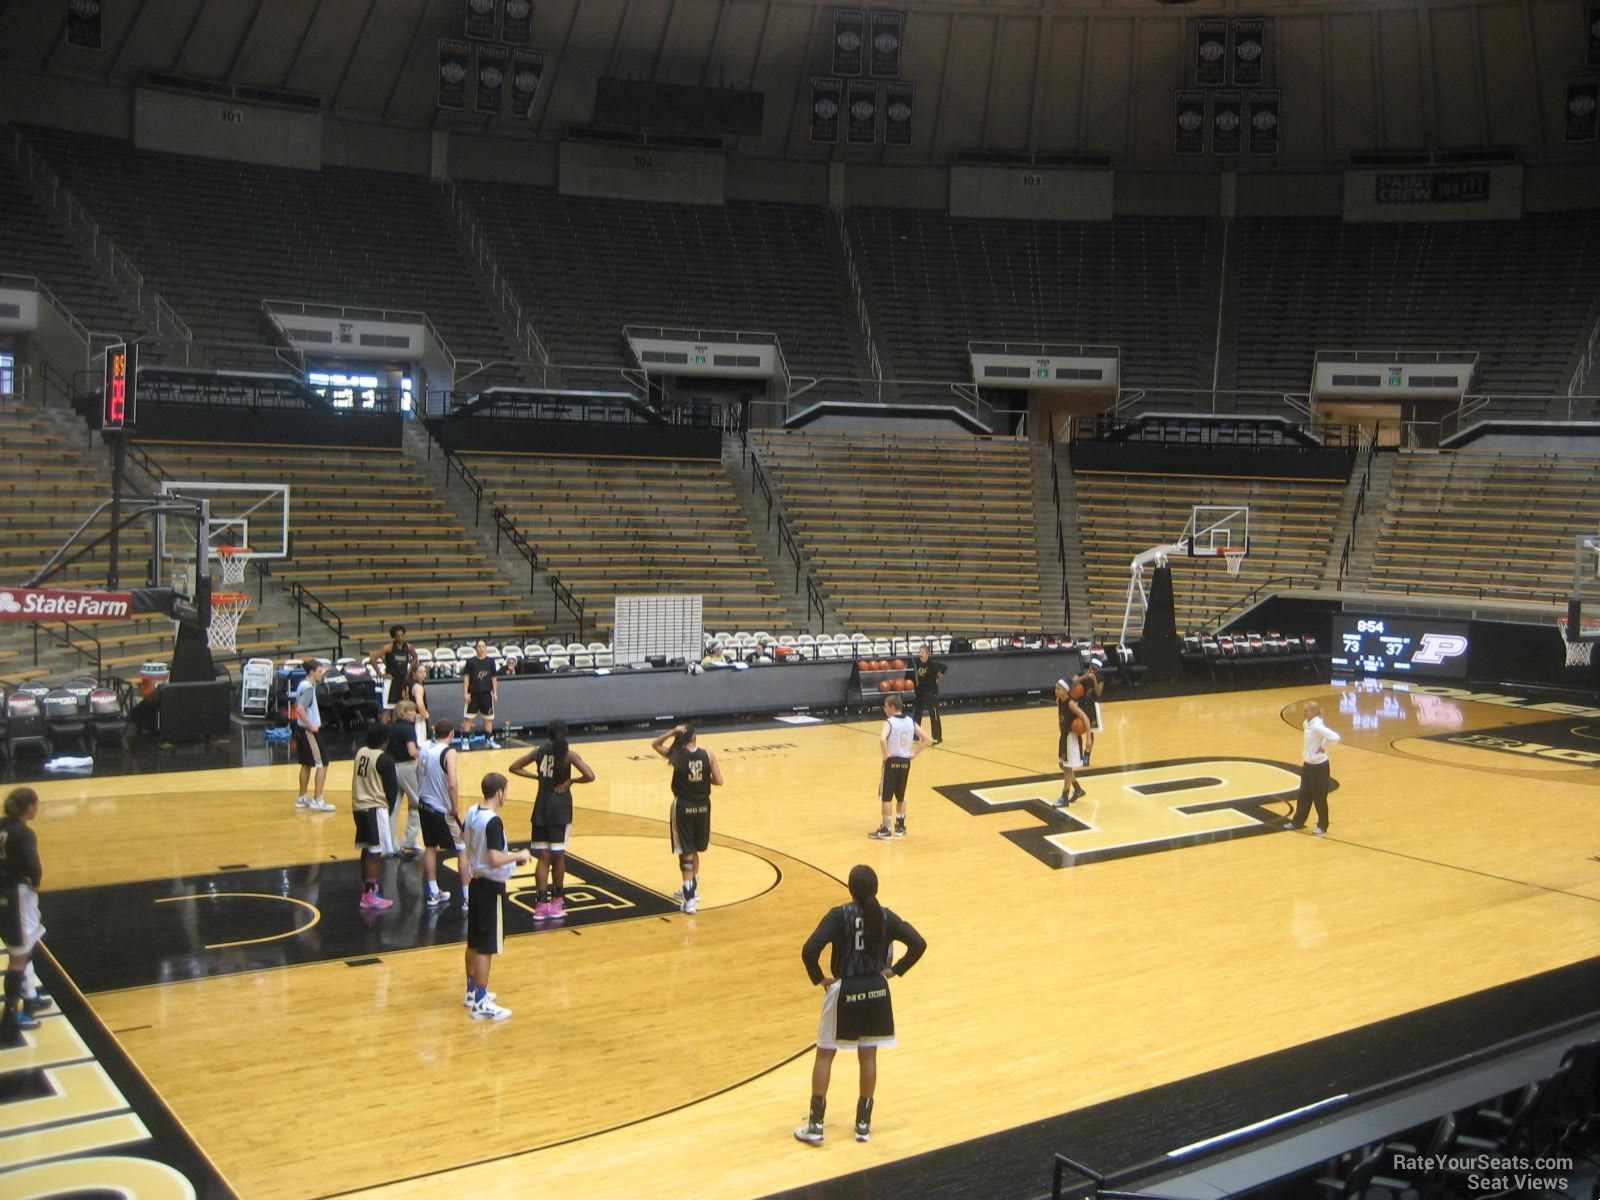 section 12, row 10 seat view  - mackey arena